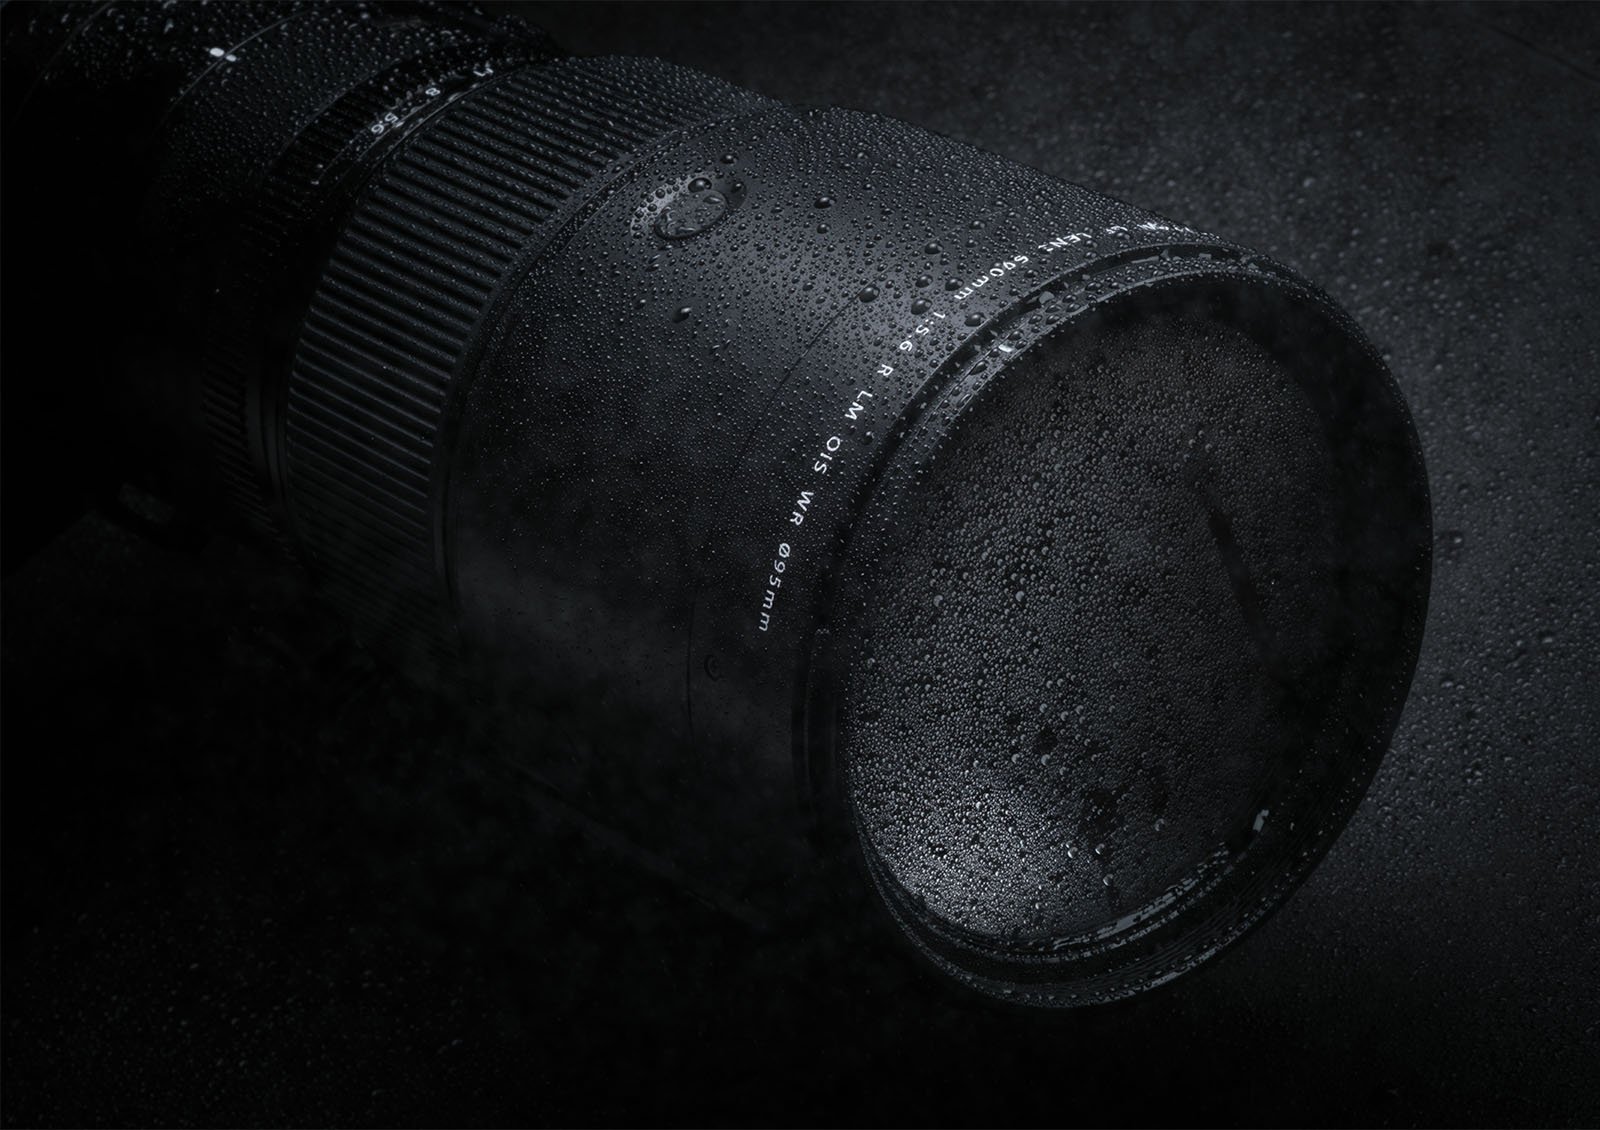 A close-up shot of a camera lens covered in water droplets. The lens, shown in a dark and moody setting, highlights its sleek and rugged design, suggesting it is weather-sealed and durable enough to withstand harsh conditions.